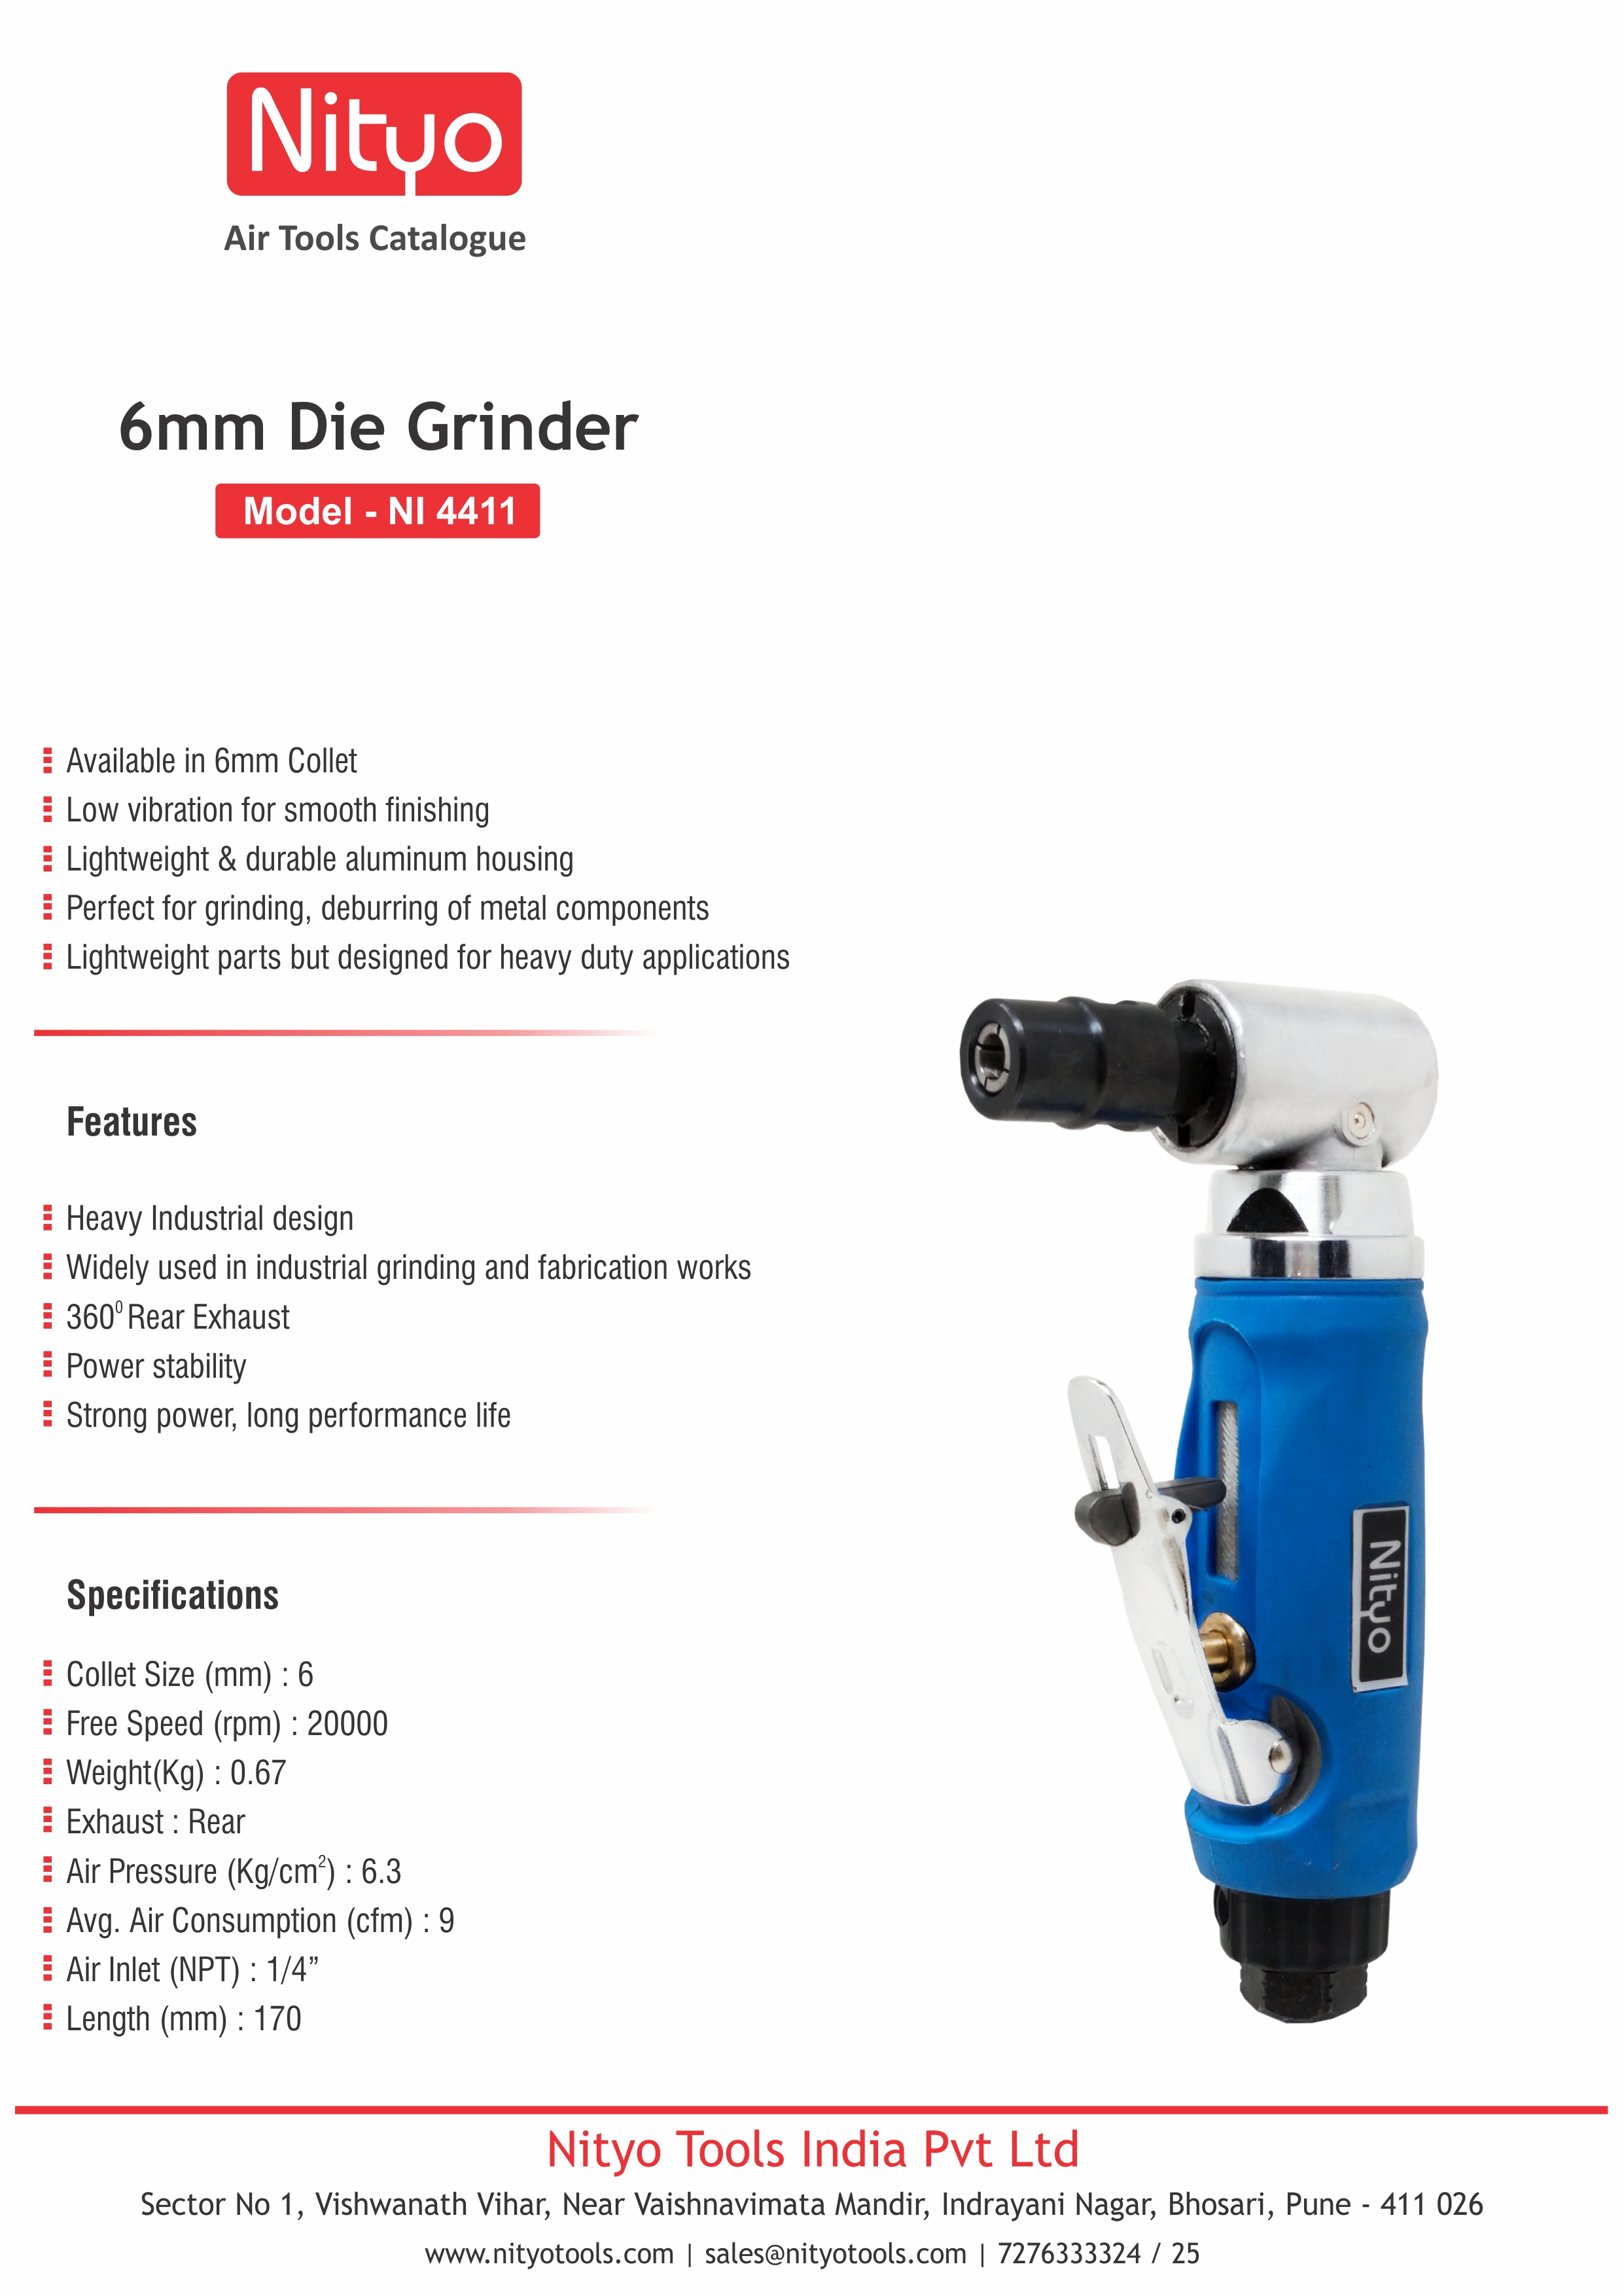 Nityo NI 4419 Pneumatic Die Grinder, Speed 21000 rpm, Collect Size 1/4 inch  